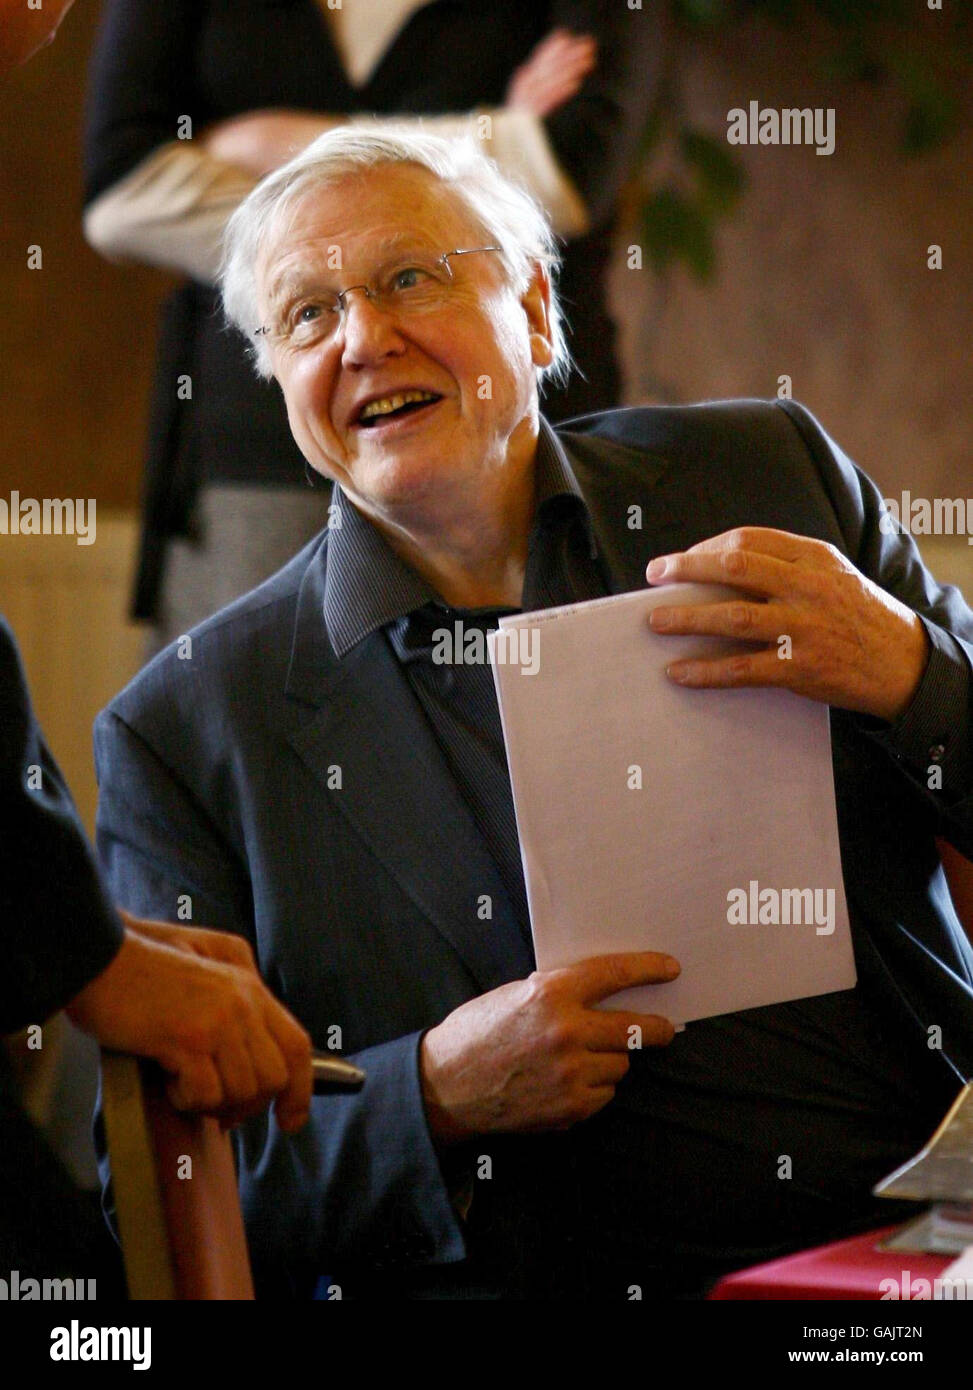 Sir David Attenborough before speaking at the Glyndebourne Public Enquiry being held in Lewes, east Sussex, into the development of a windfarm near the Glyndebourne site. Stock Photo